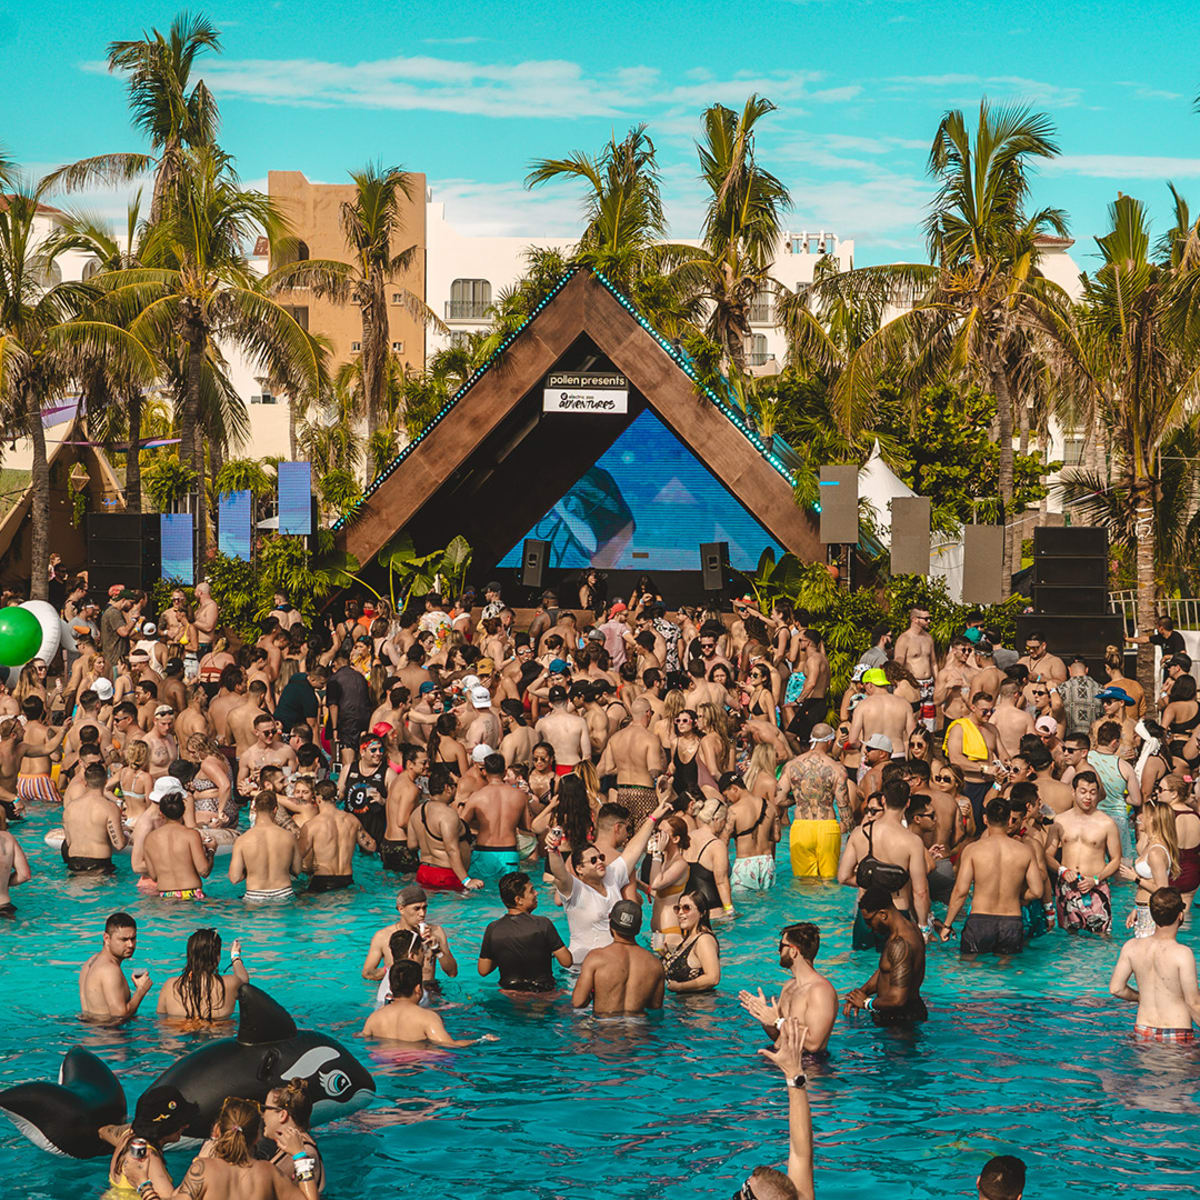 Pollen on X: Just for Laughs Escapes features 3 days and 4 nights of  activities in gorgeous Cancún, Mexico including; Headliner comedy shows,  podcasts by the pool, epic beach parties, comedy roasts